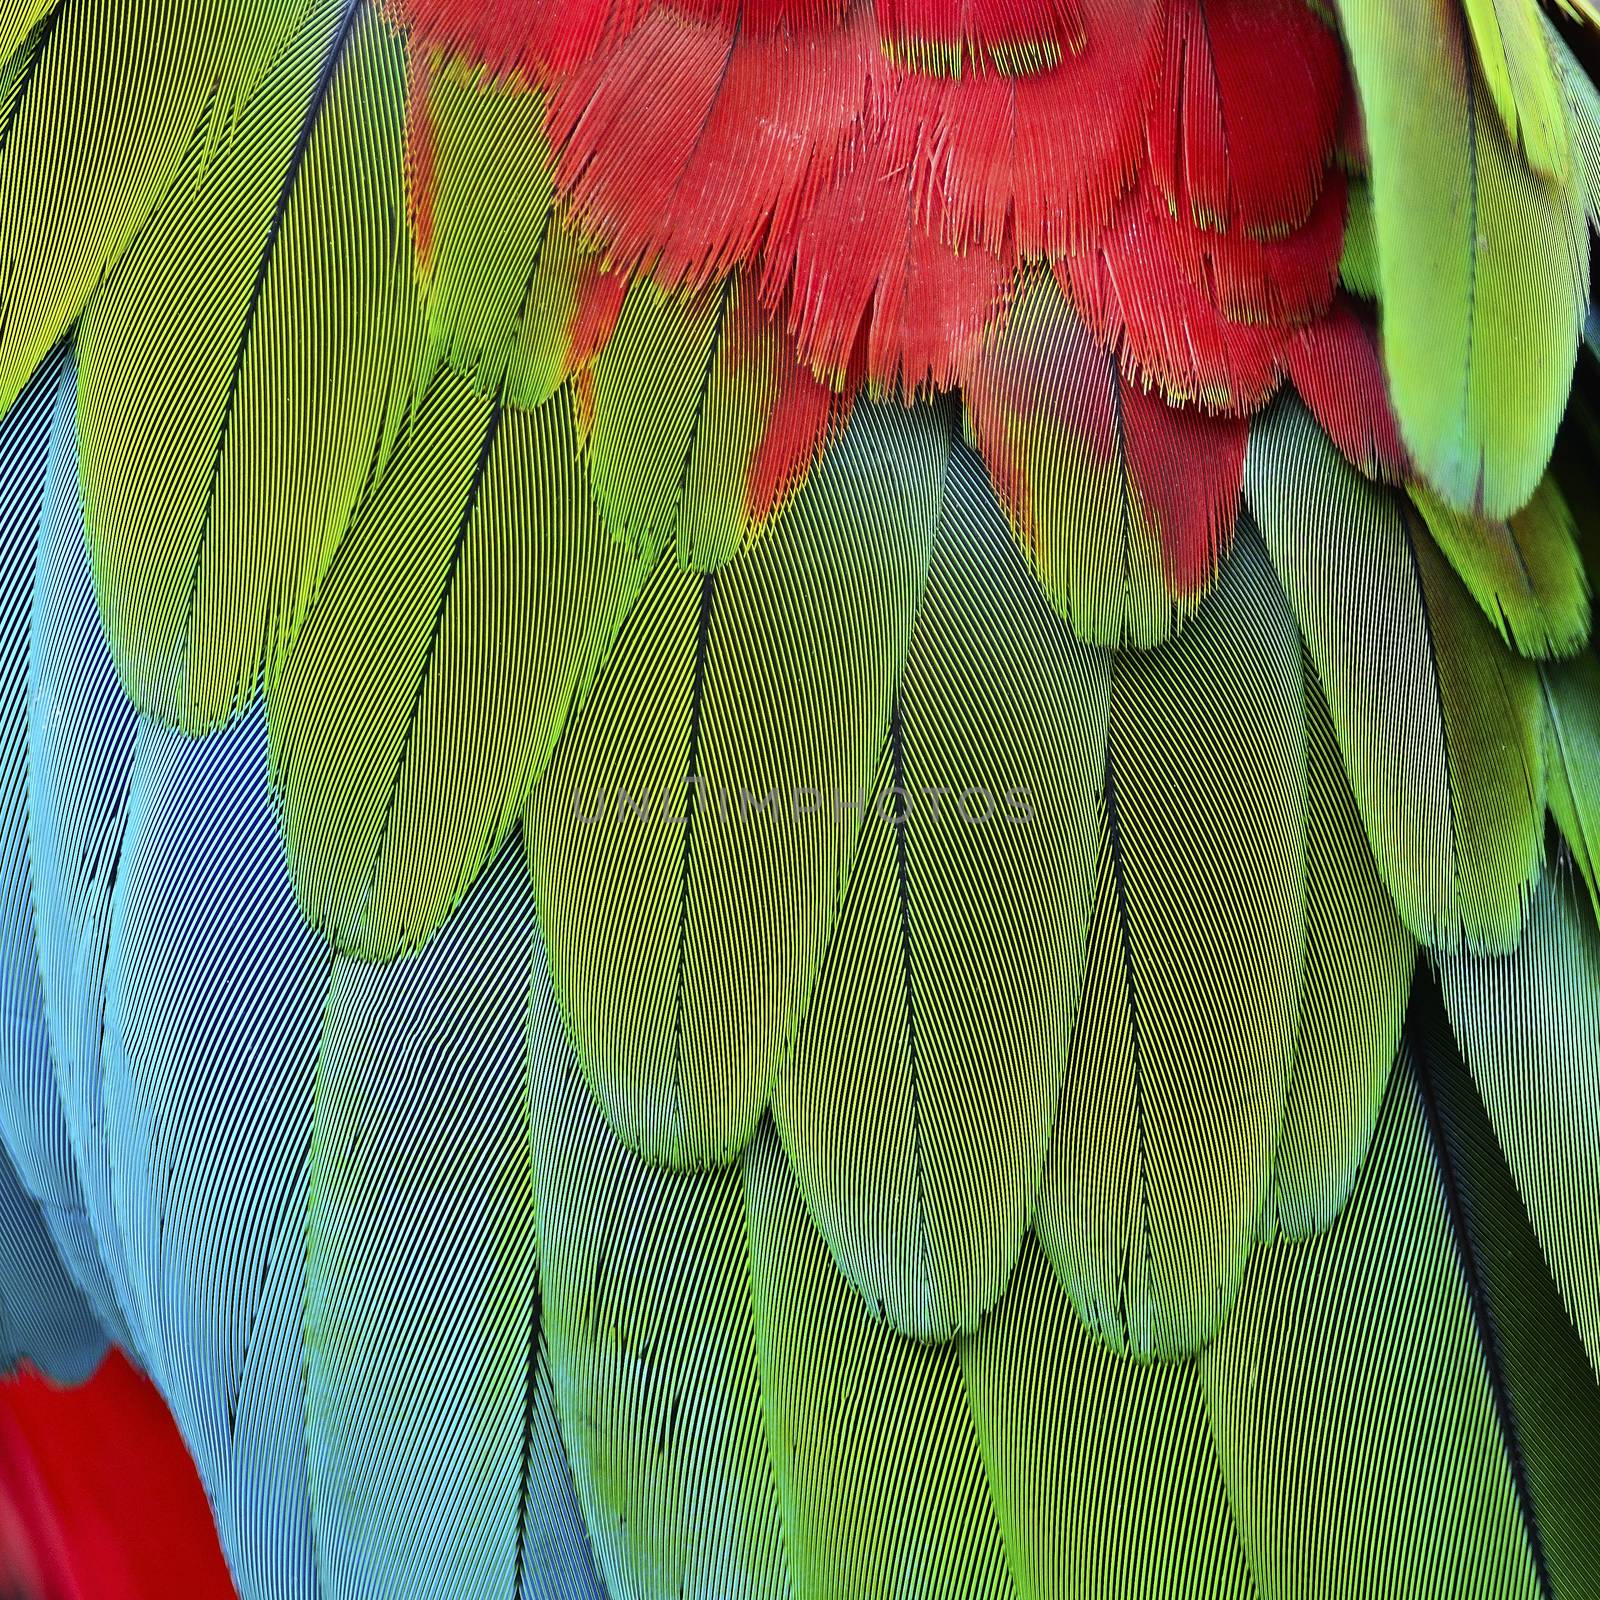 Beautiful nature background texture of Greenwinged Macaw feathers pattern